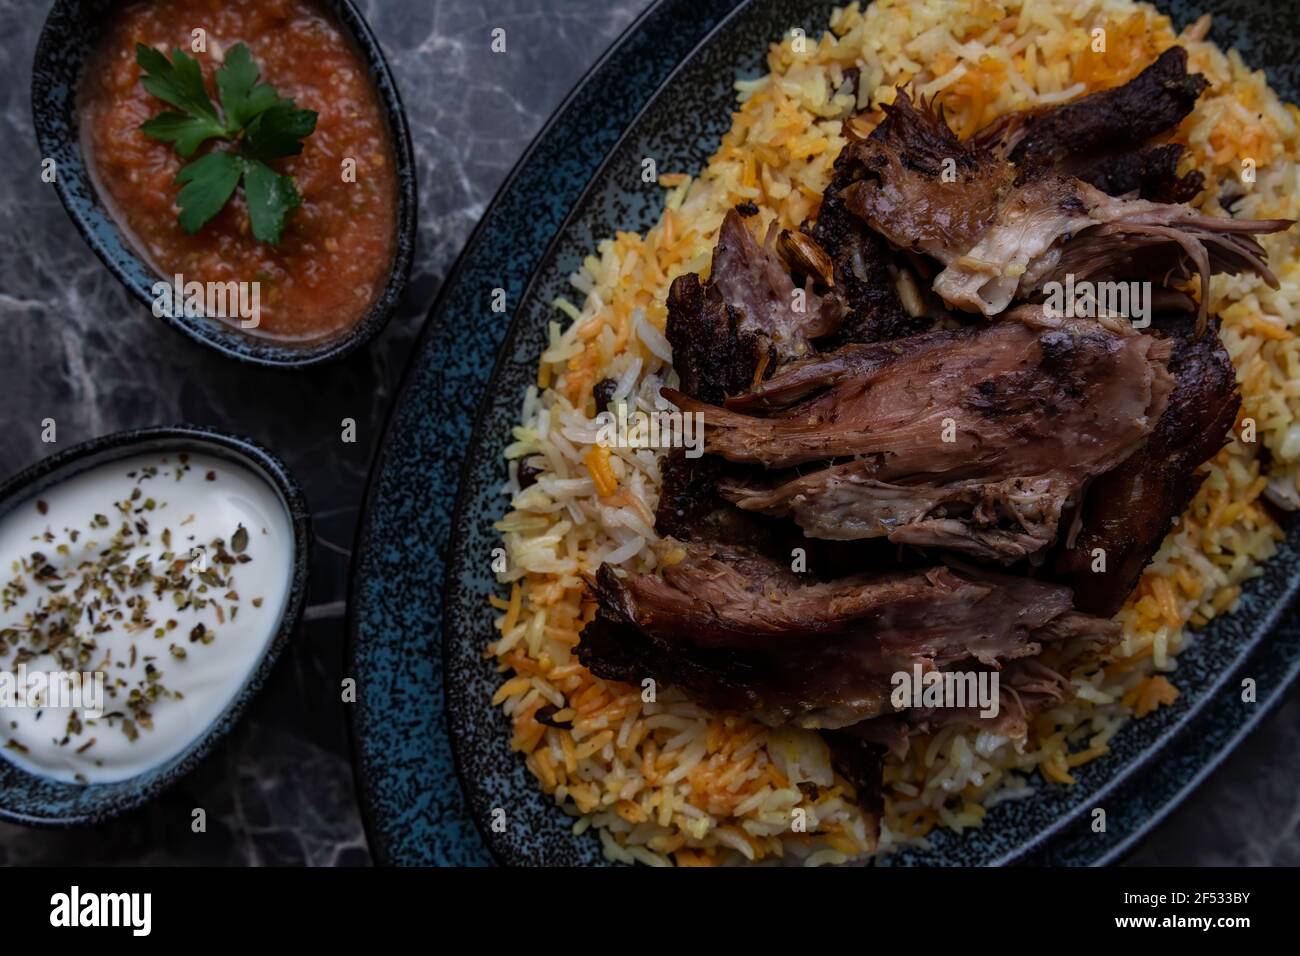 A plate of Kabsa or mandi ,rice and grilled lamb and two small plates of Yogurt and hot sauce. Stock Photo